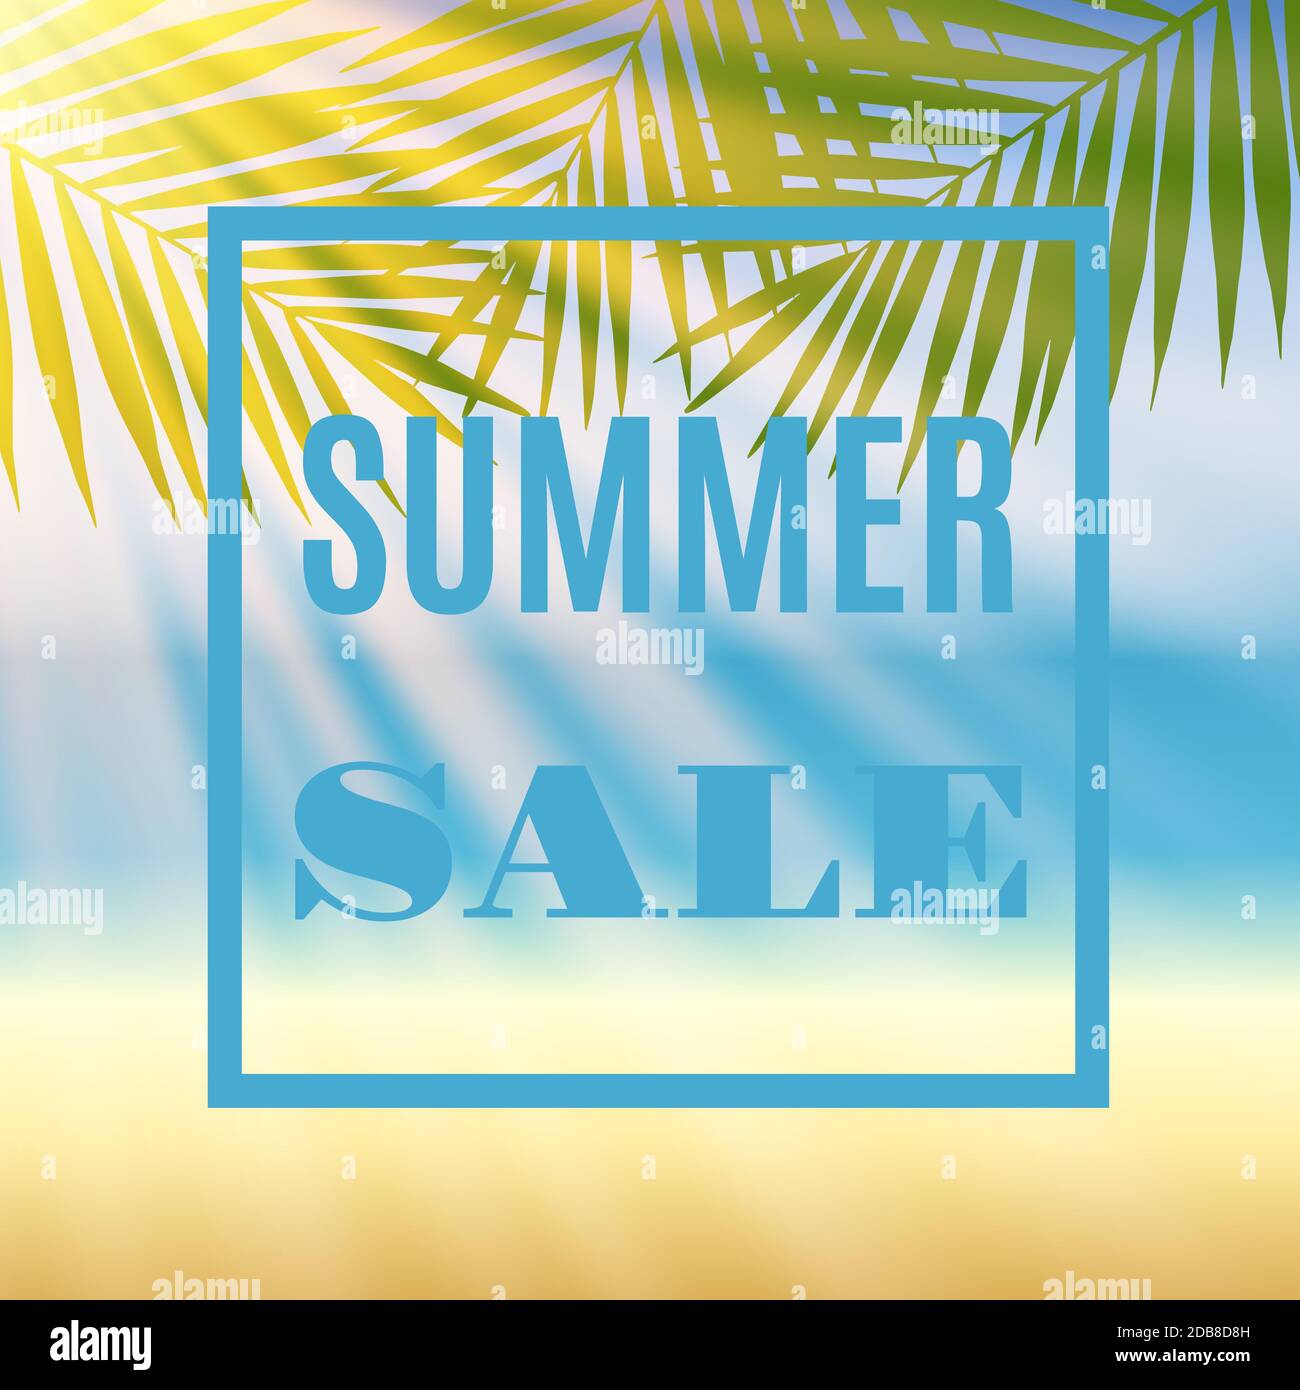 Summer Clearance Sale Stock Illustrations – 25,442 Summer